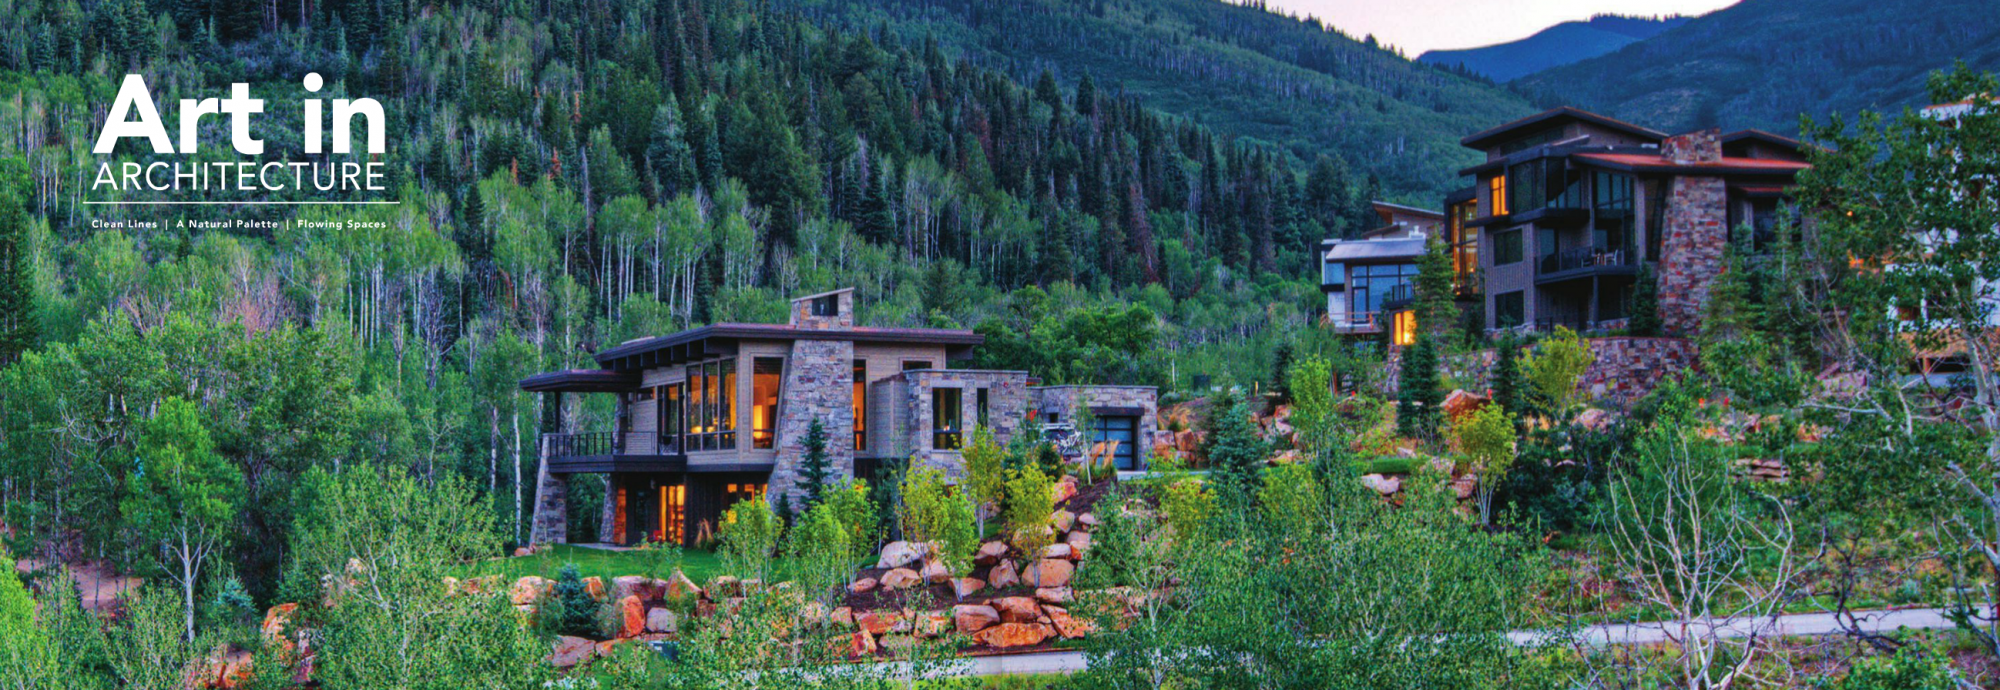 Enclave at Sun Canyon Luxury Homes for Sale Park City Utah